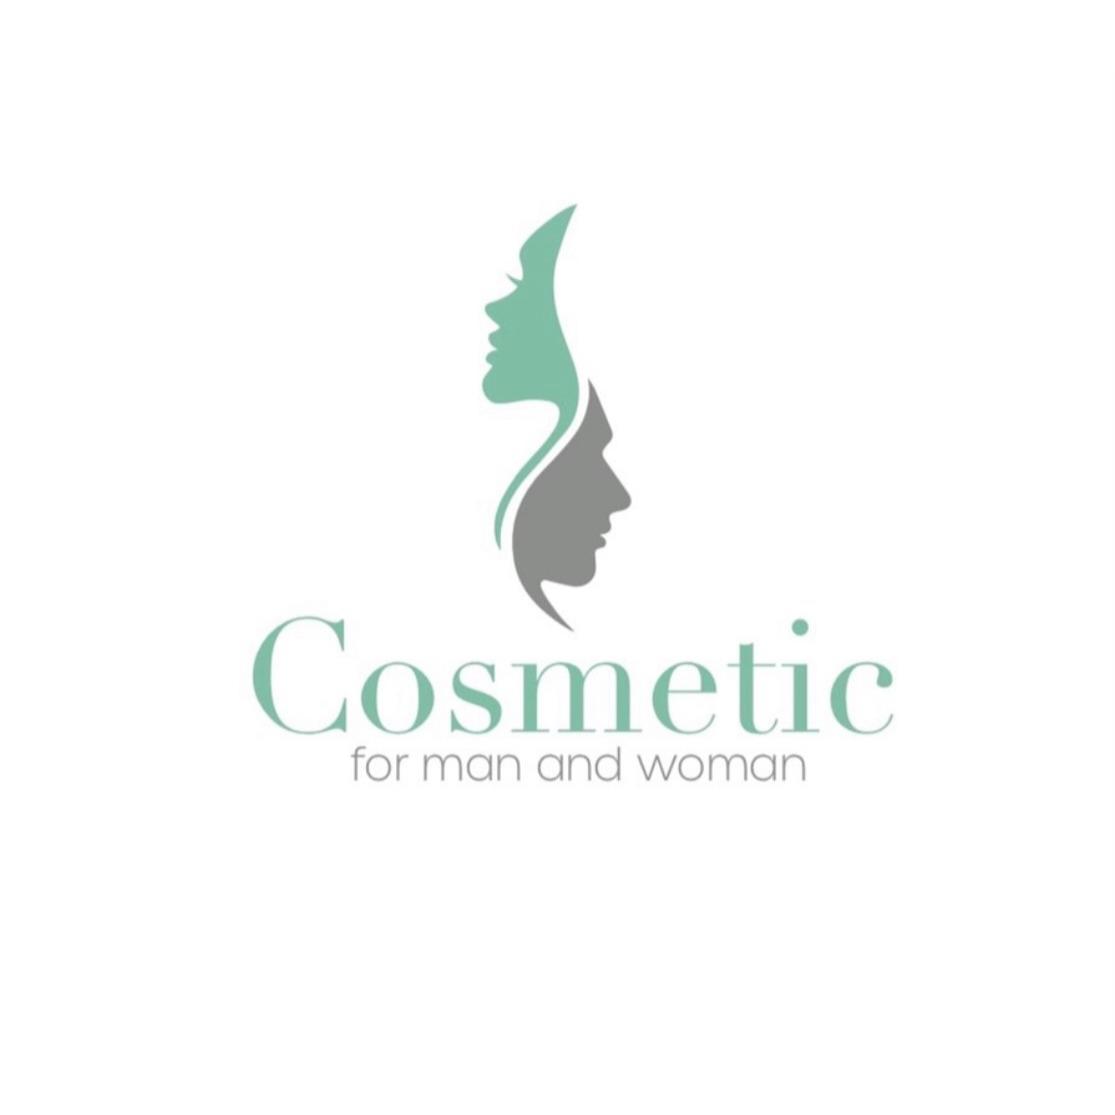 Logo Cosmetic for man and woman